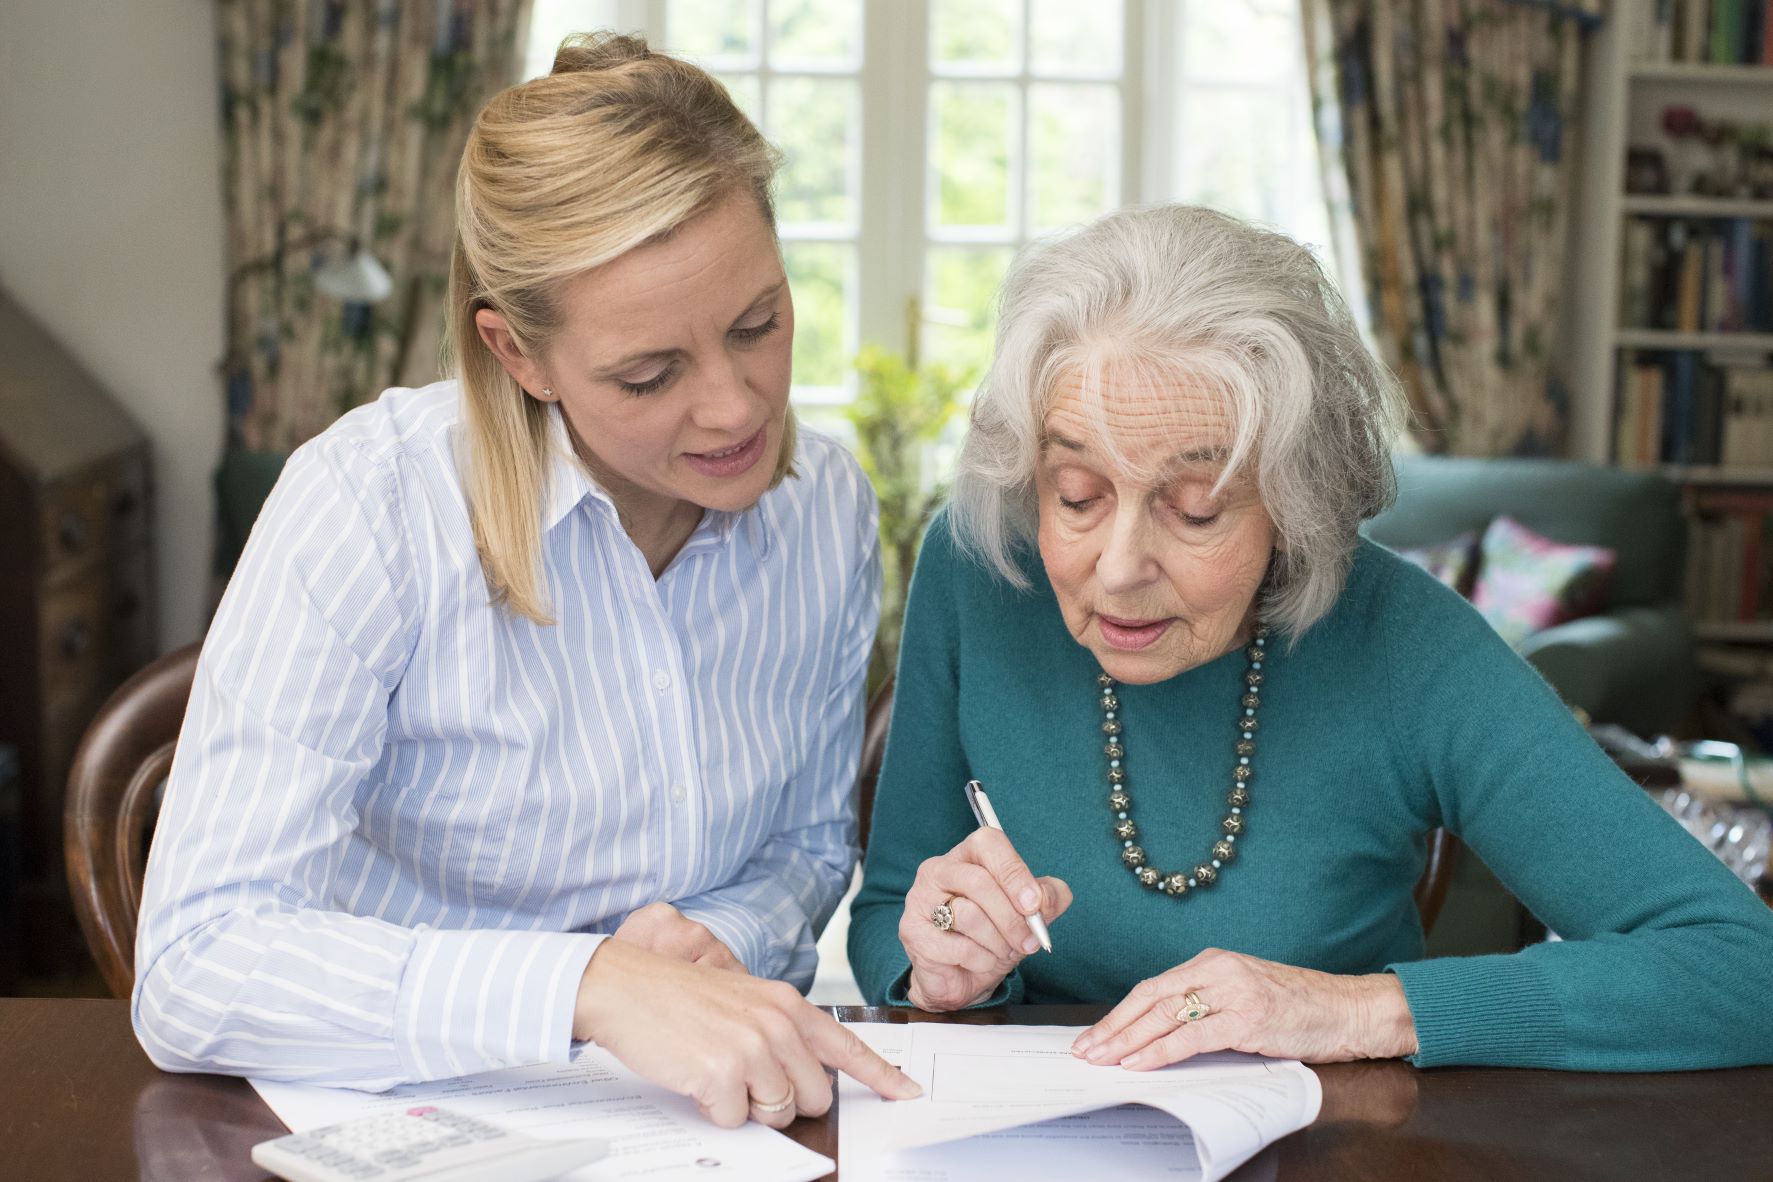 When Should You Make Your Power of Attorney